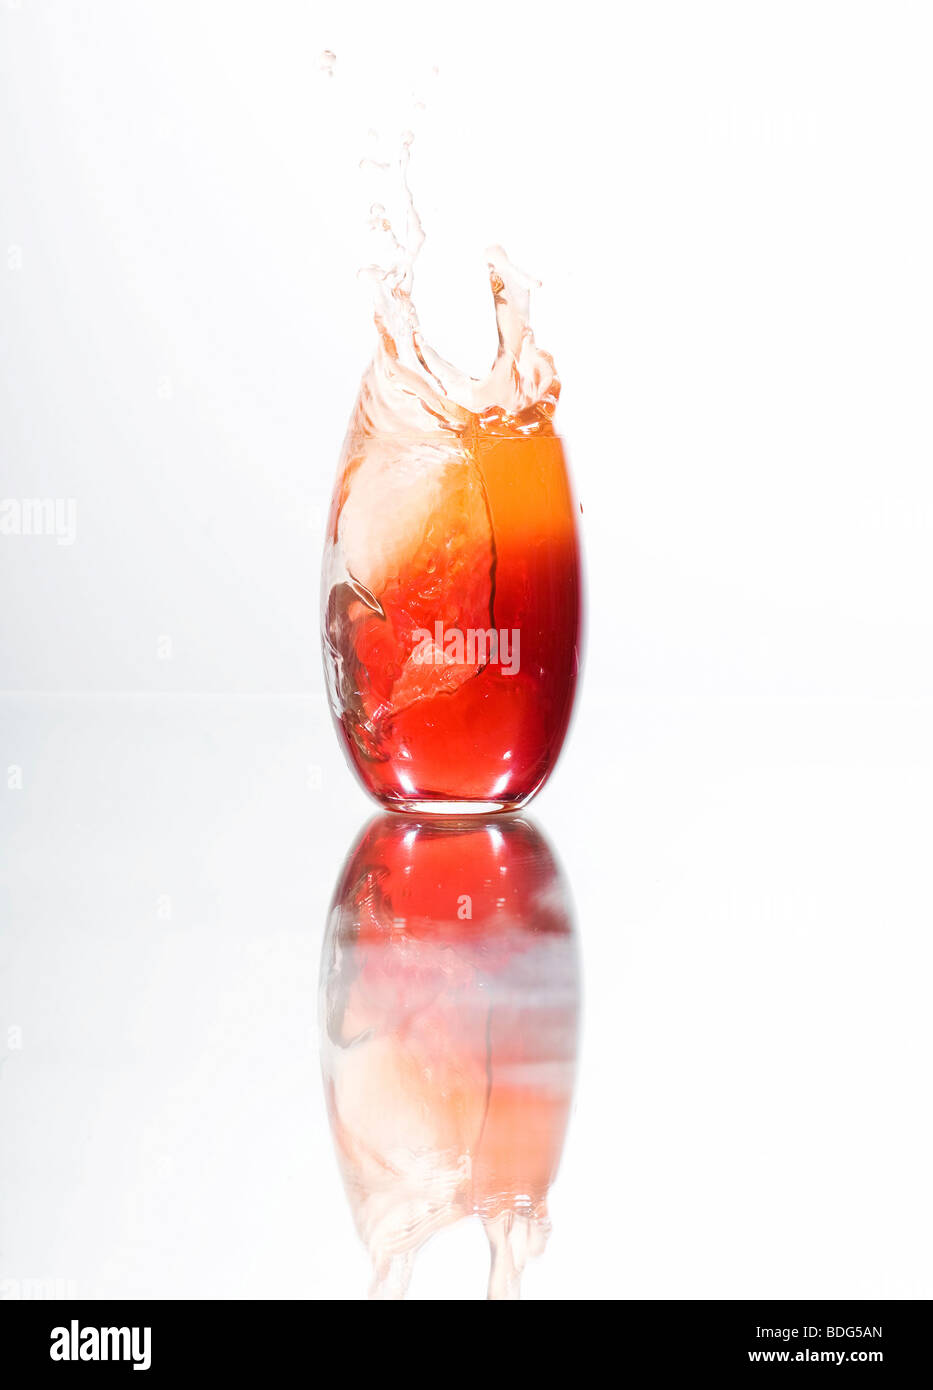 Ice cubes falling into a glass filled with red liquid Stock Photo